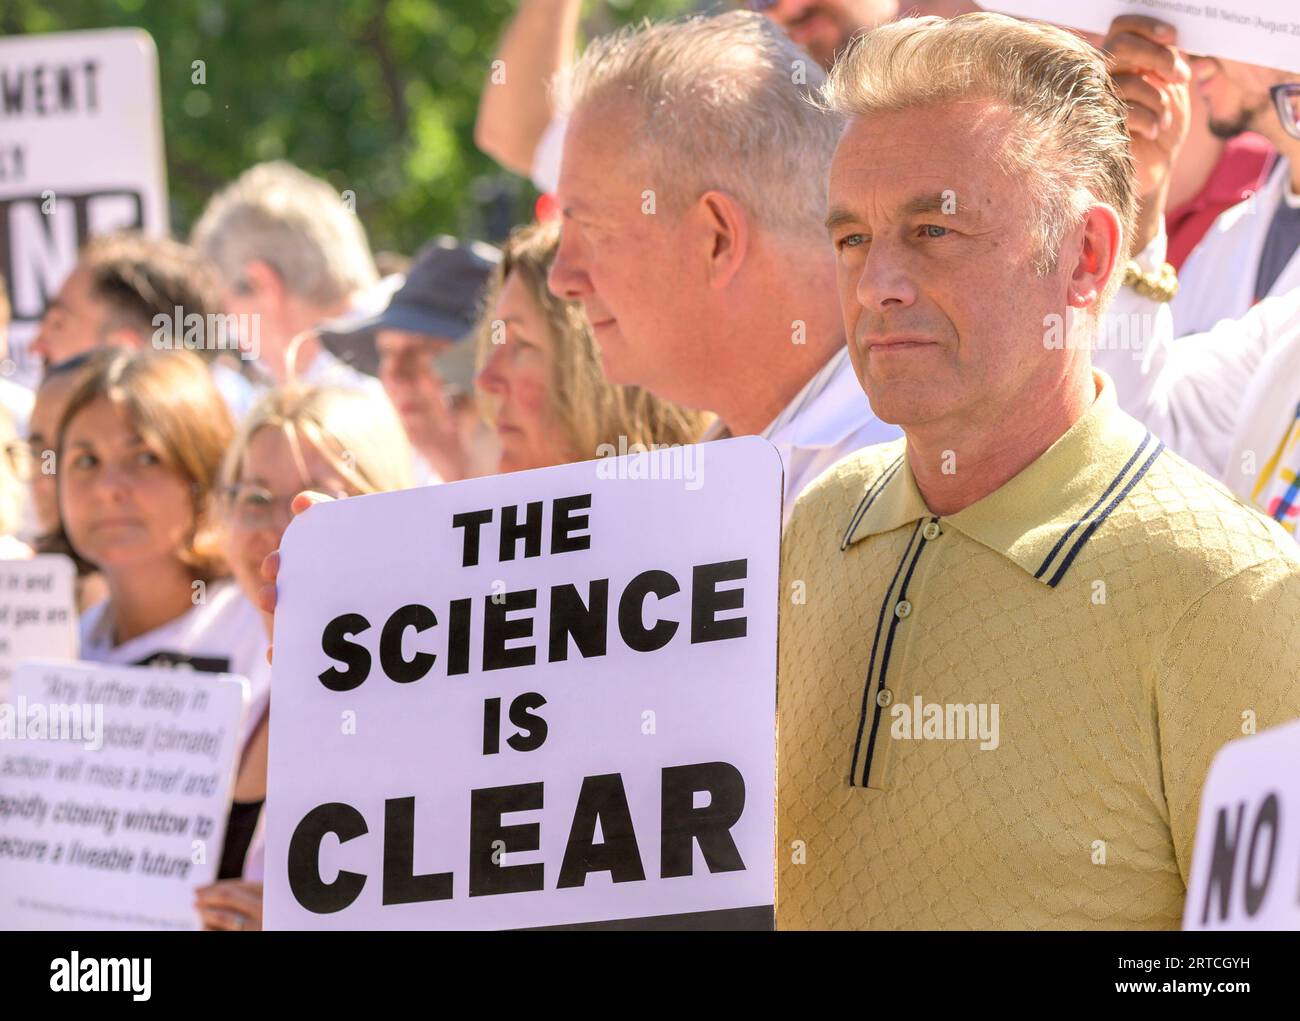 TV nature presenter Chris Packham with scientists in Parliament Square to protest against the granting of new licenses for oil extraction. London, UK. Stock Photo